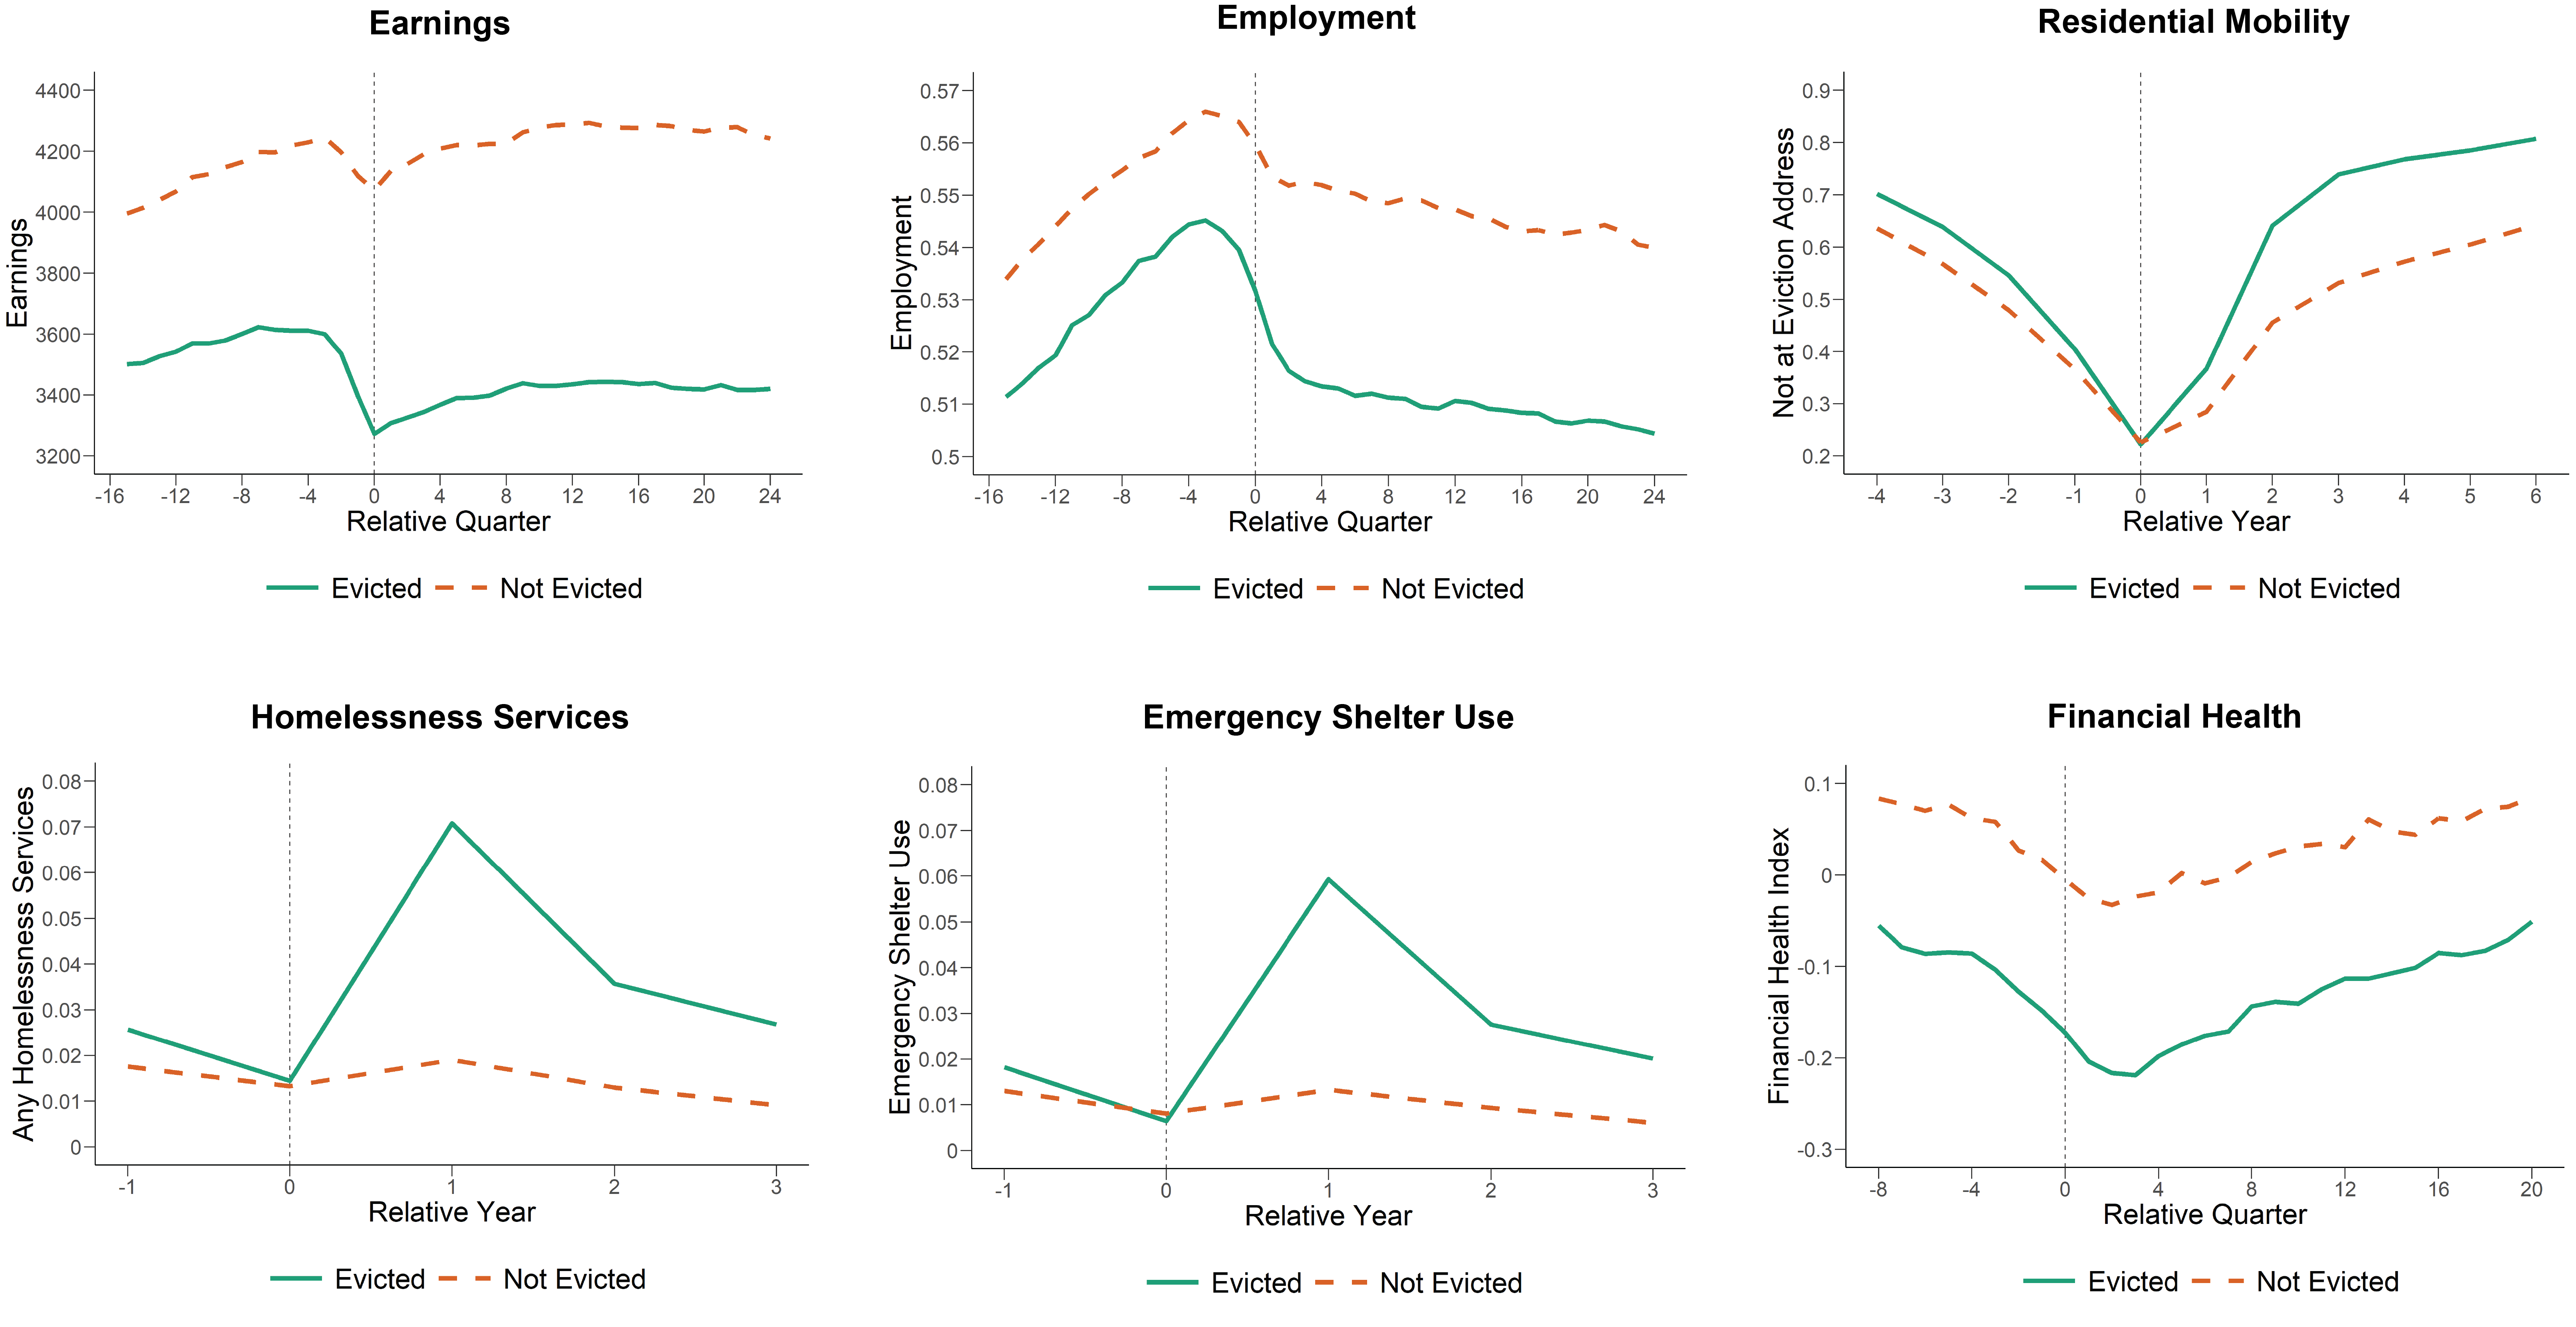 Figure 1 includes six graphs depicting changes before and after eviction filing for the combined sample population in New York City and Chicago area. The graphs show that eviction causes is related to significant increases in homelessness and residential mobility and the probability of staying in an emergency shelter and using homelessness services, and that during post-eviction homelessness or housing instability, employment and earnings also tend to decline significantly. Each graph has a solid green line depicting evicted populations of the overall sample and an orange dotted line representing the comparison group, those not evicted but living in the same neighborhood. 